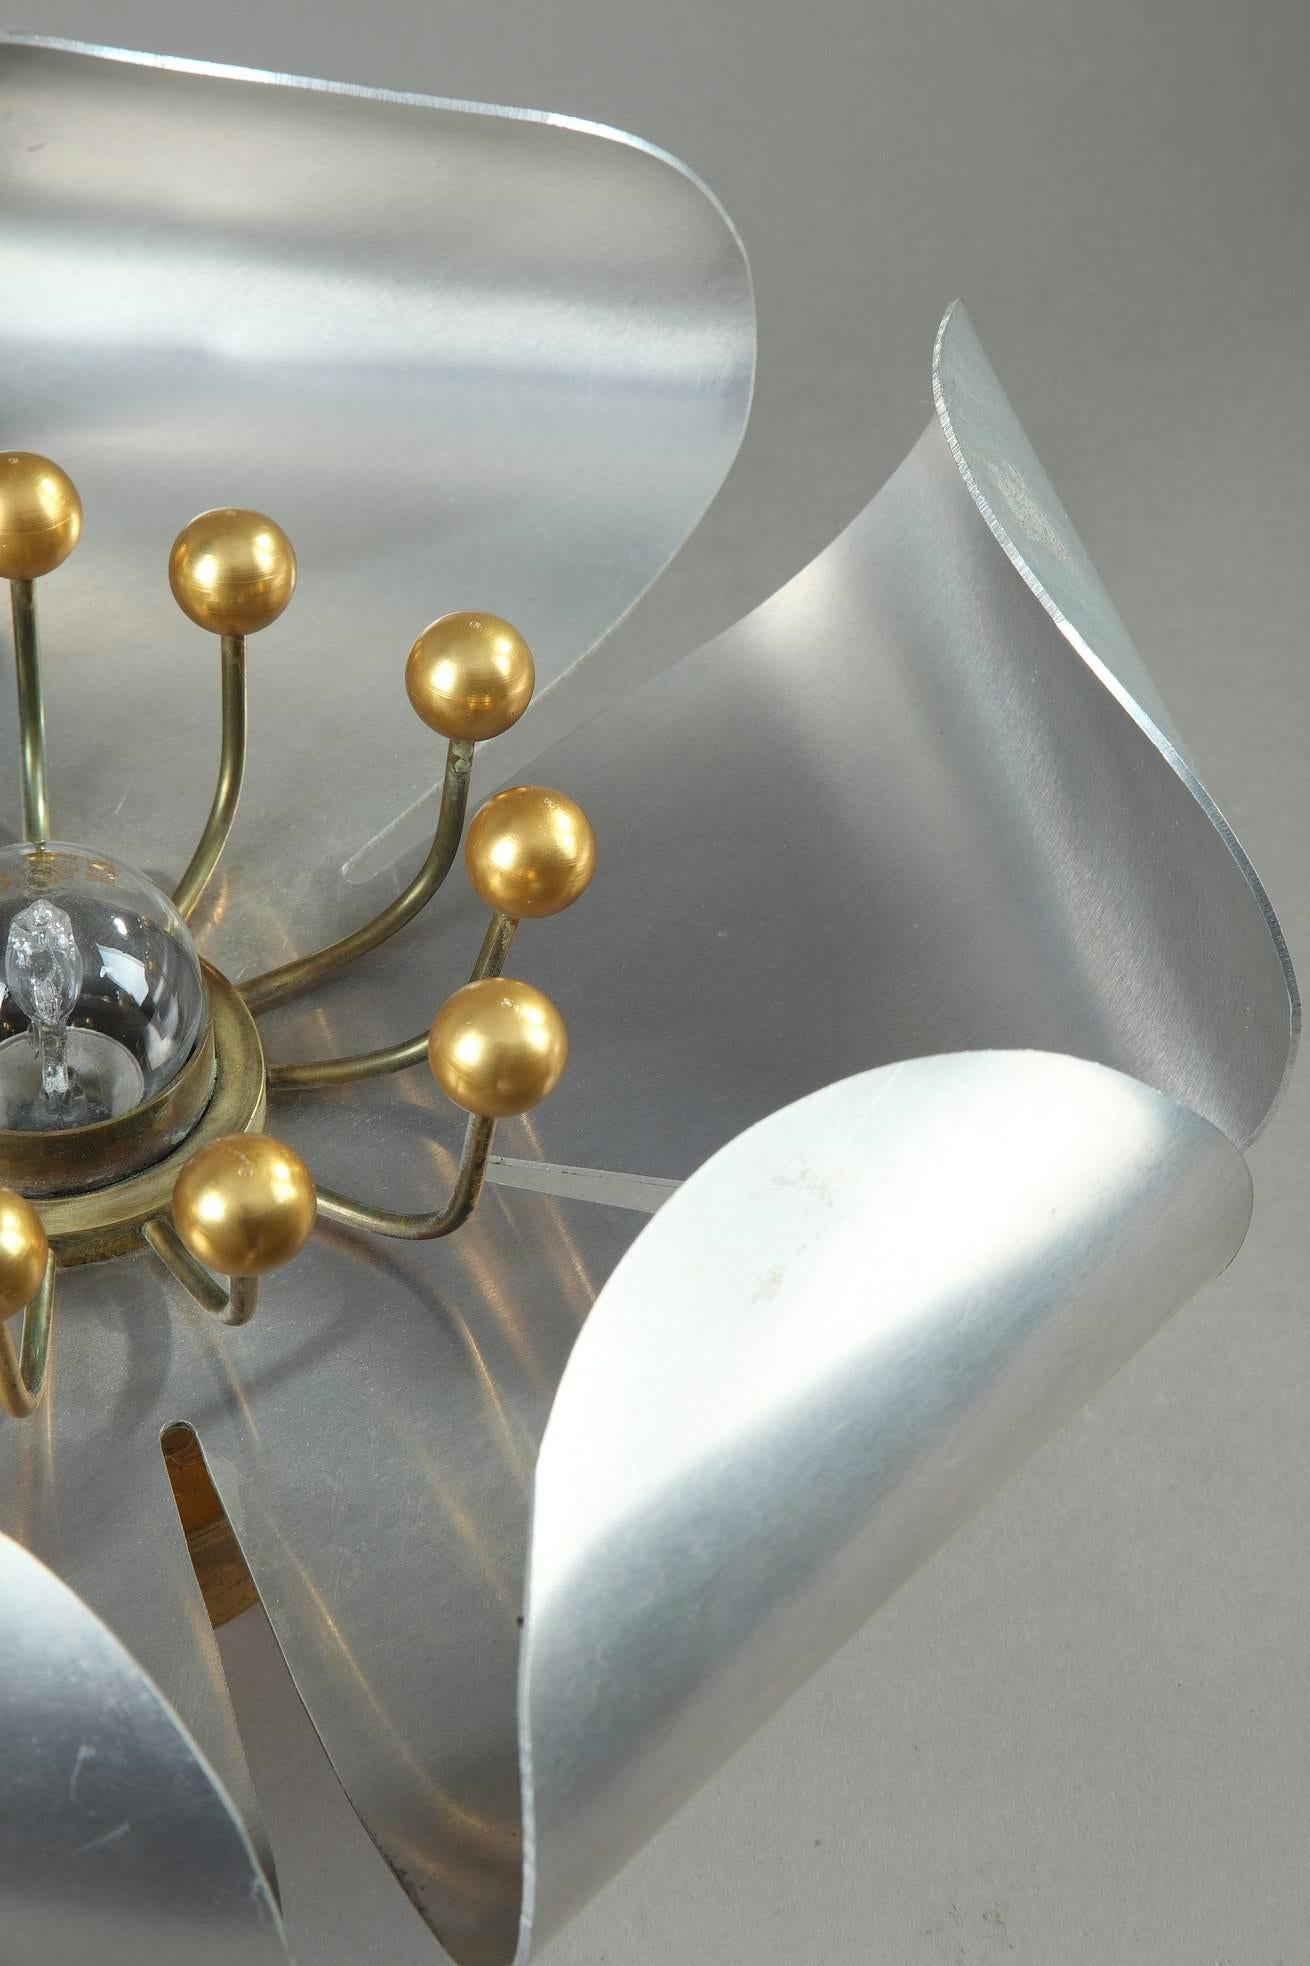 1970s chrome-plated and brass pistil-shaped wall light. The use of silver and gold colours creates an exquisite effect. Some very light scratches on the metal,


circa 1970
Dimensions: W 15 in, D 15in, H 6.7in.
Dimensions: L 38cm, P 38cm, H 17cm.